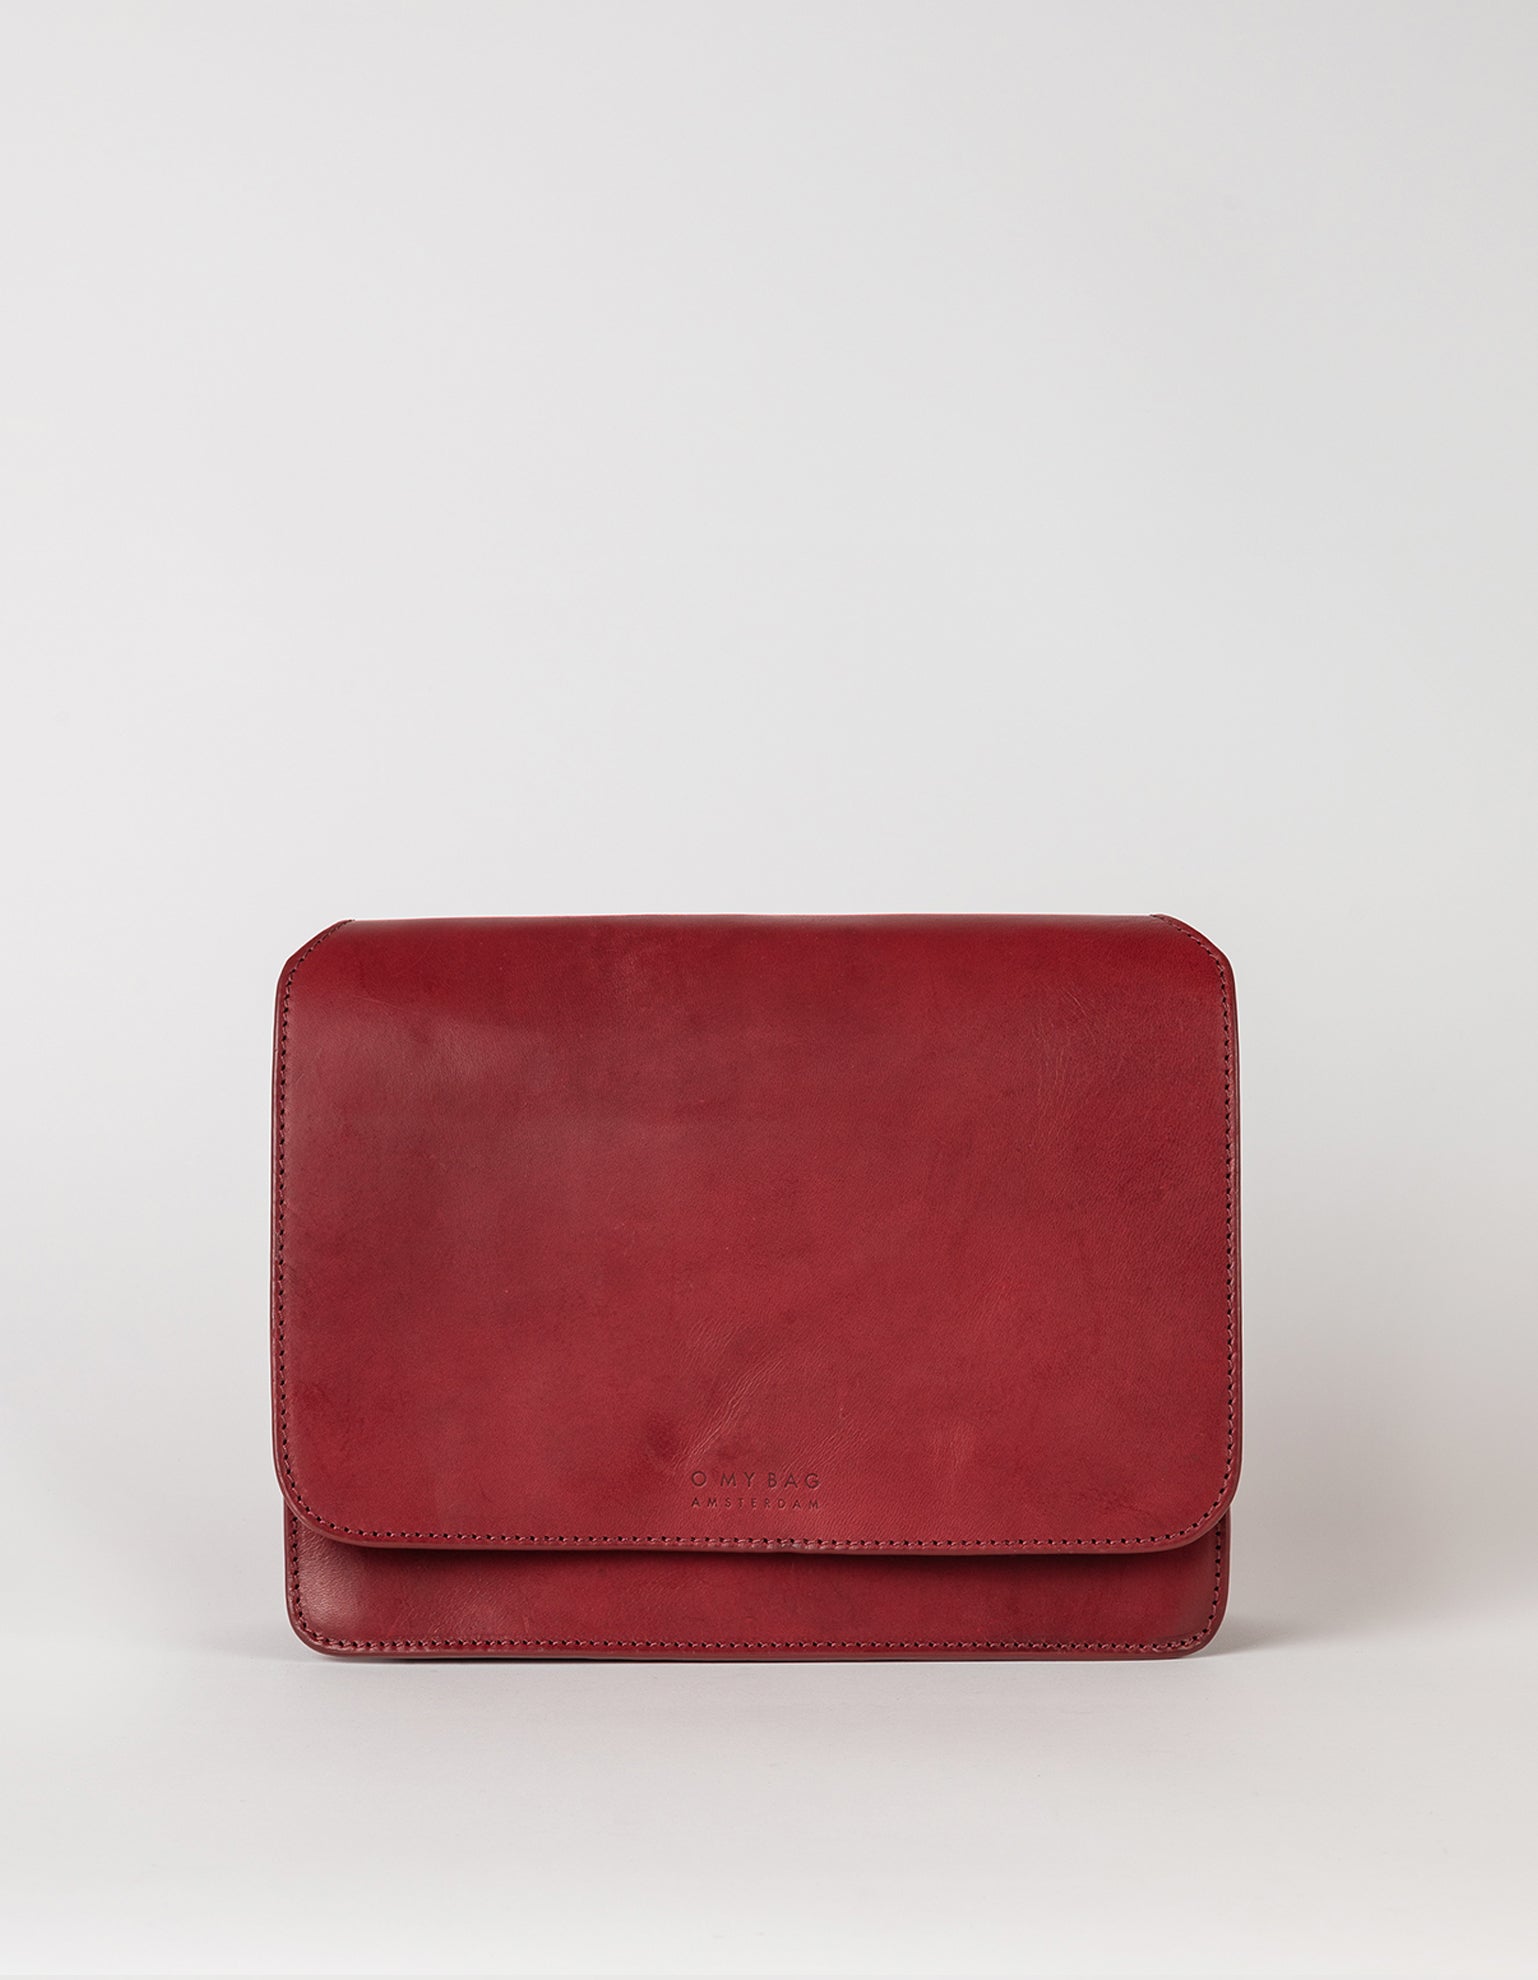 Audrey ruby classic leather bag without strap - front product image